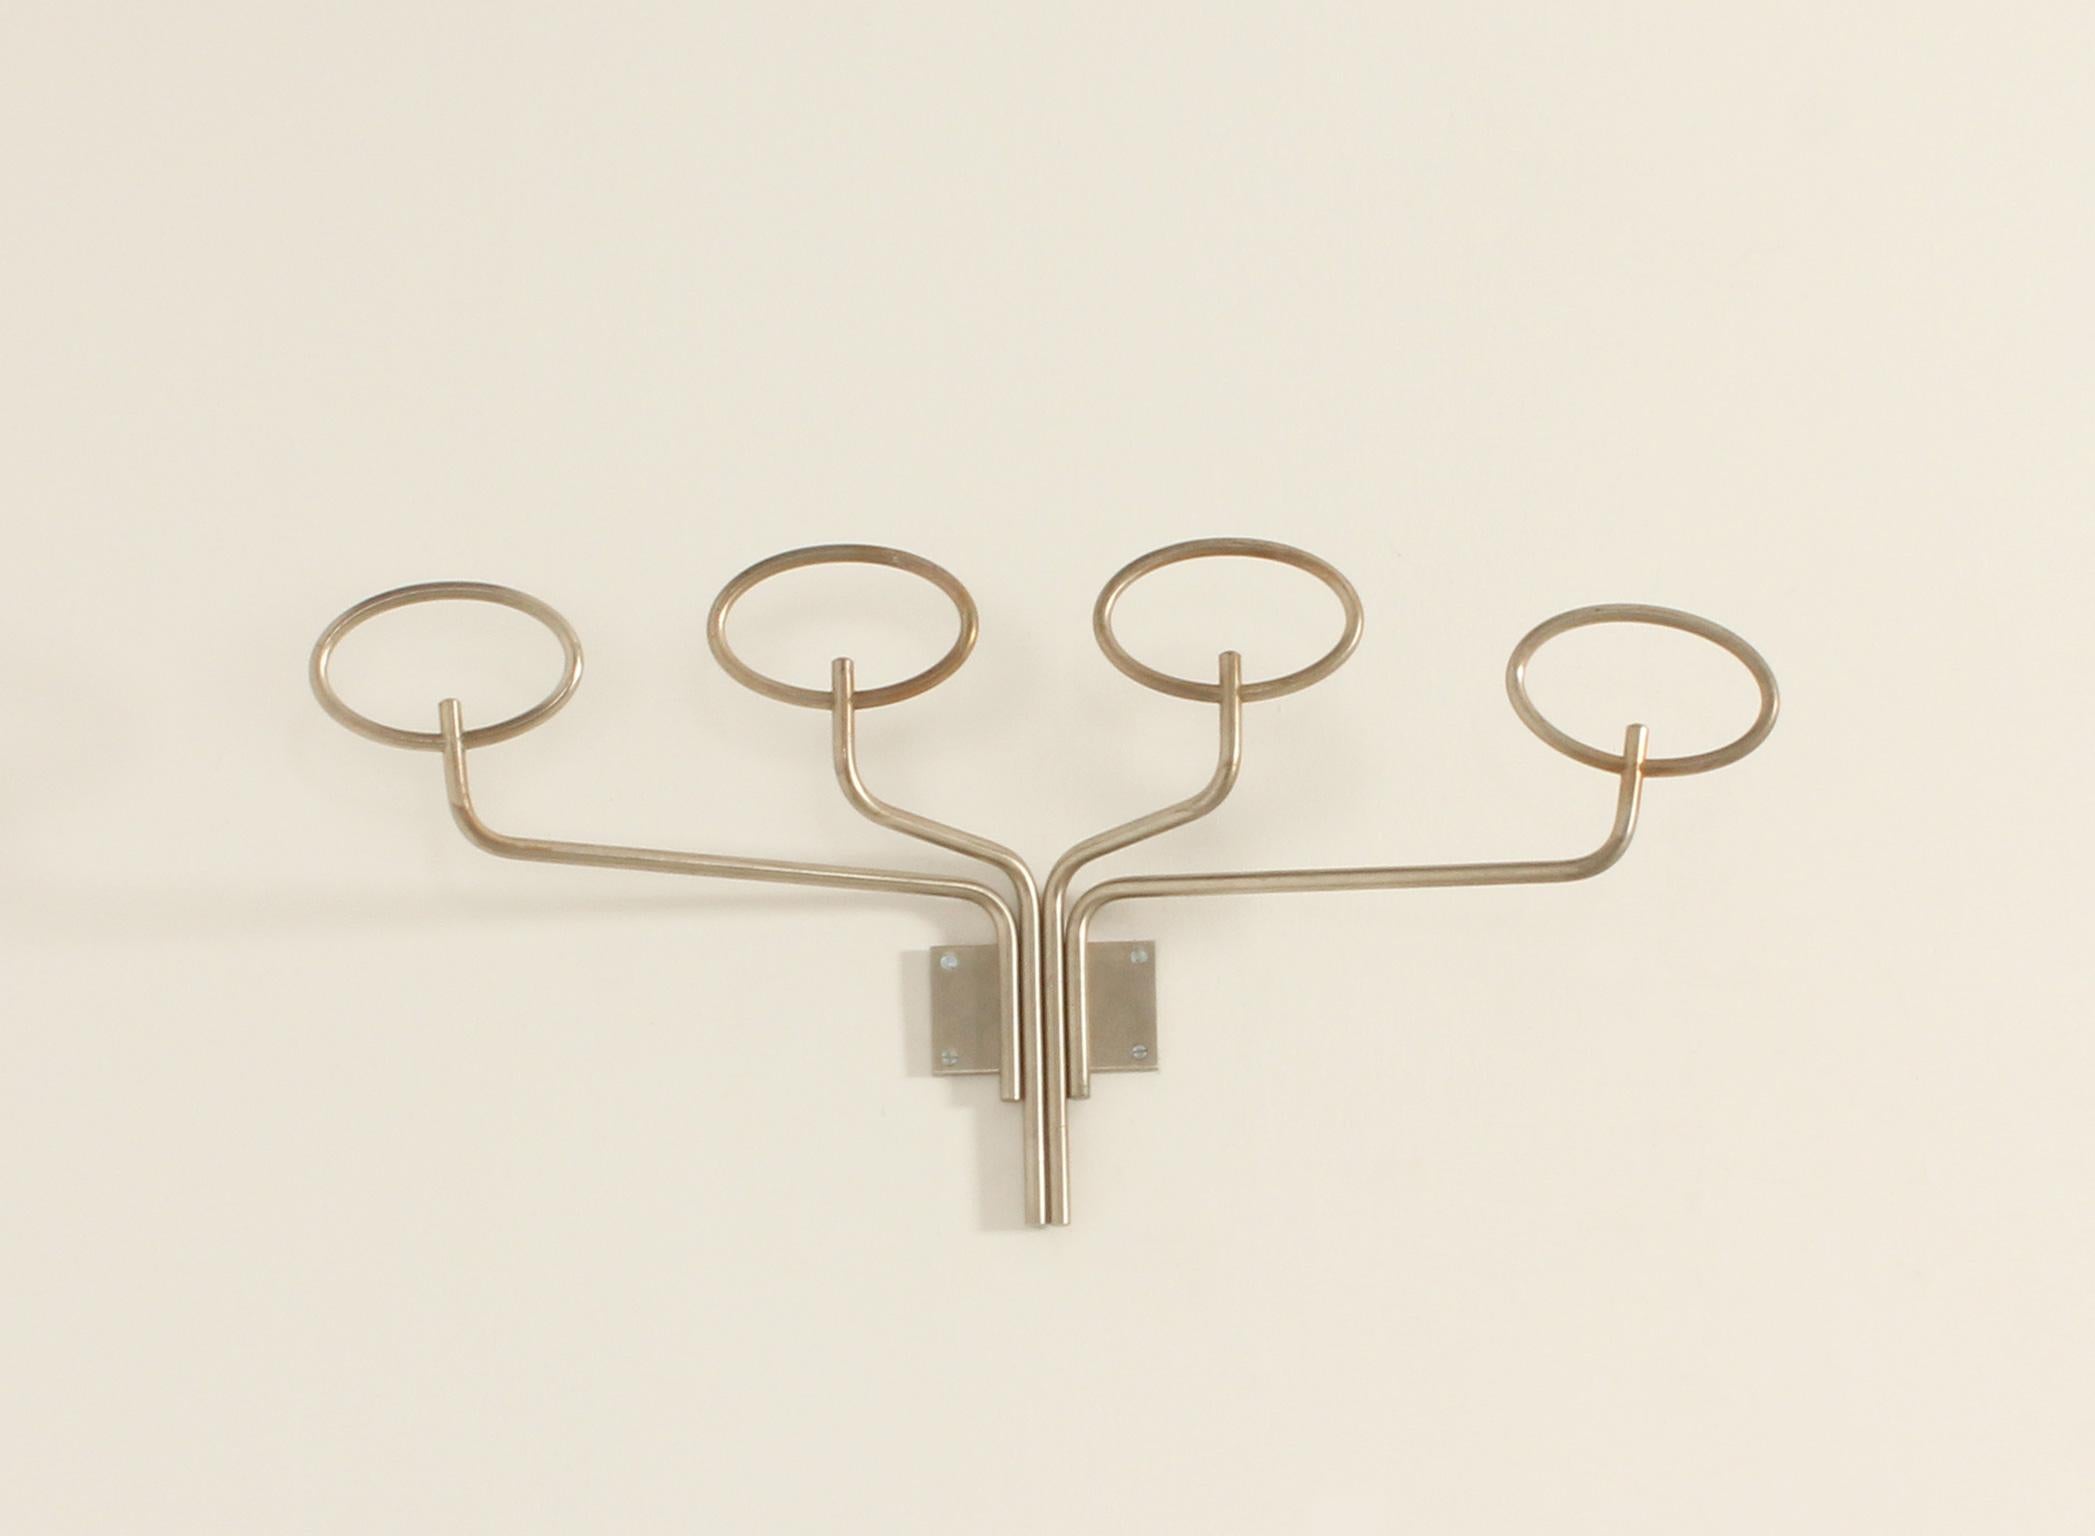 Clitoquattro coat rack designed in 1960's by Sergio Mazza for Artemide, Italy. Nickel plated solid brass with four oval-shaped hangers. 